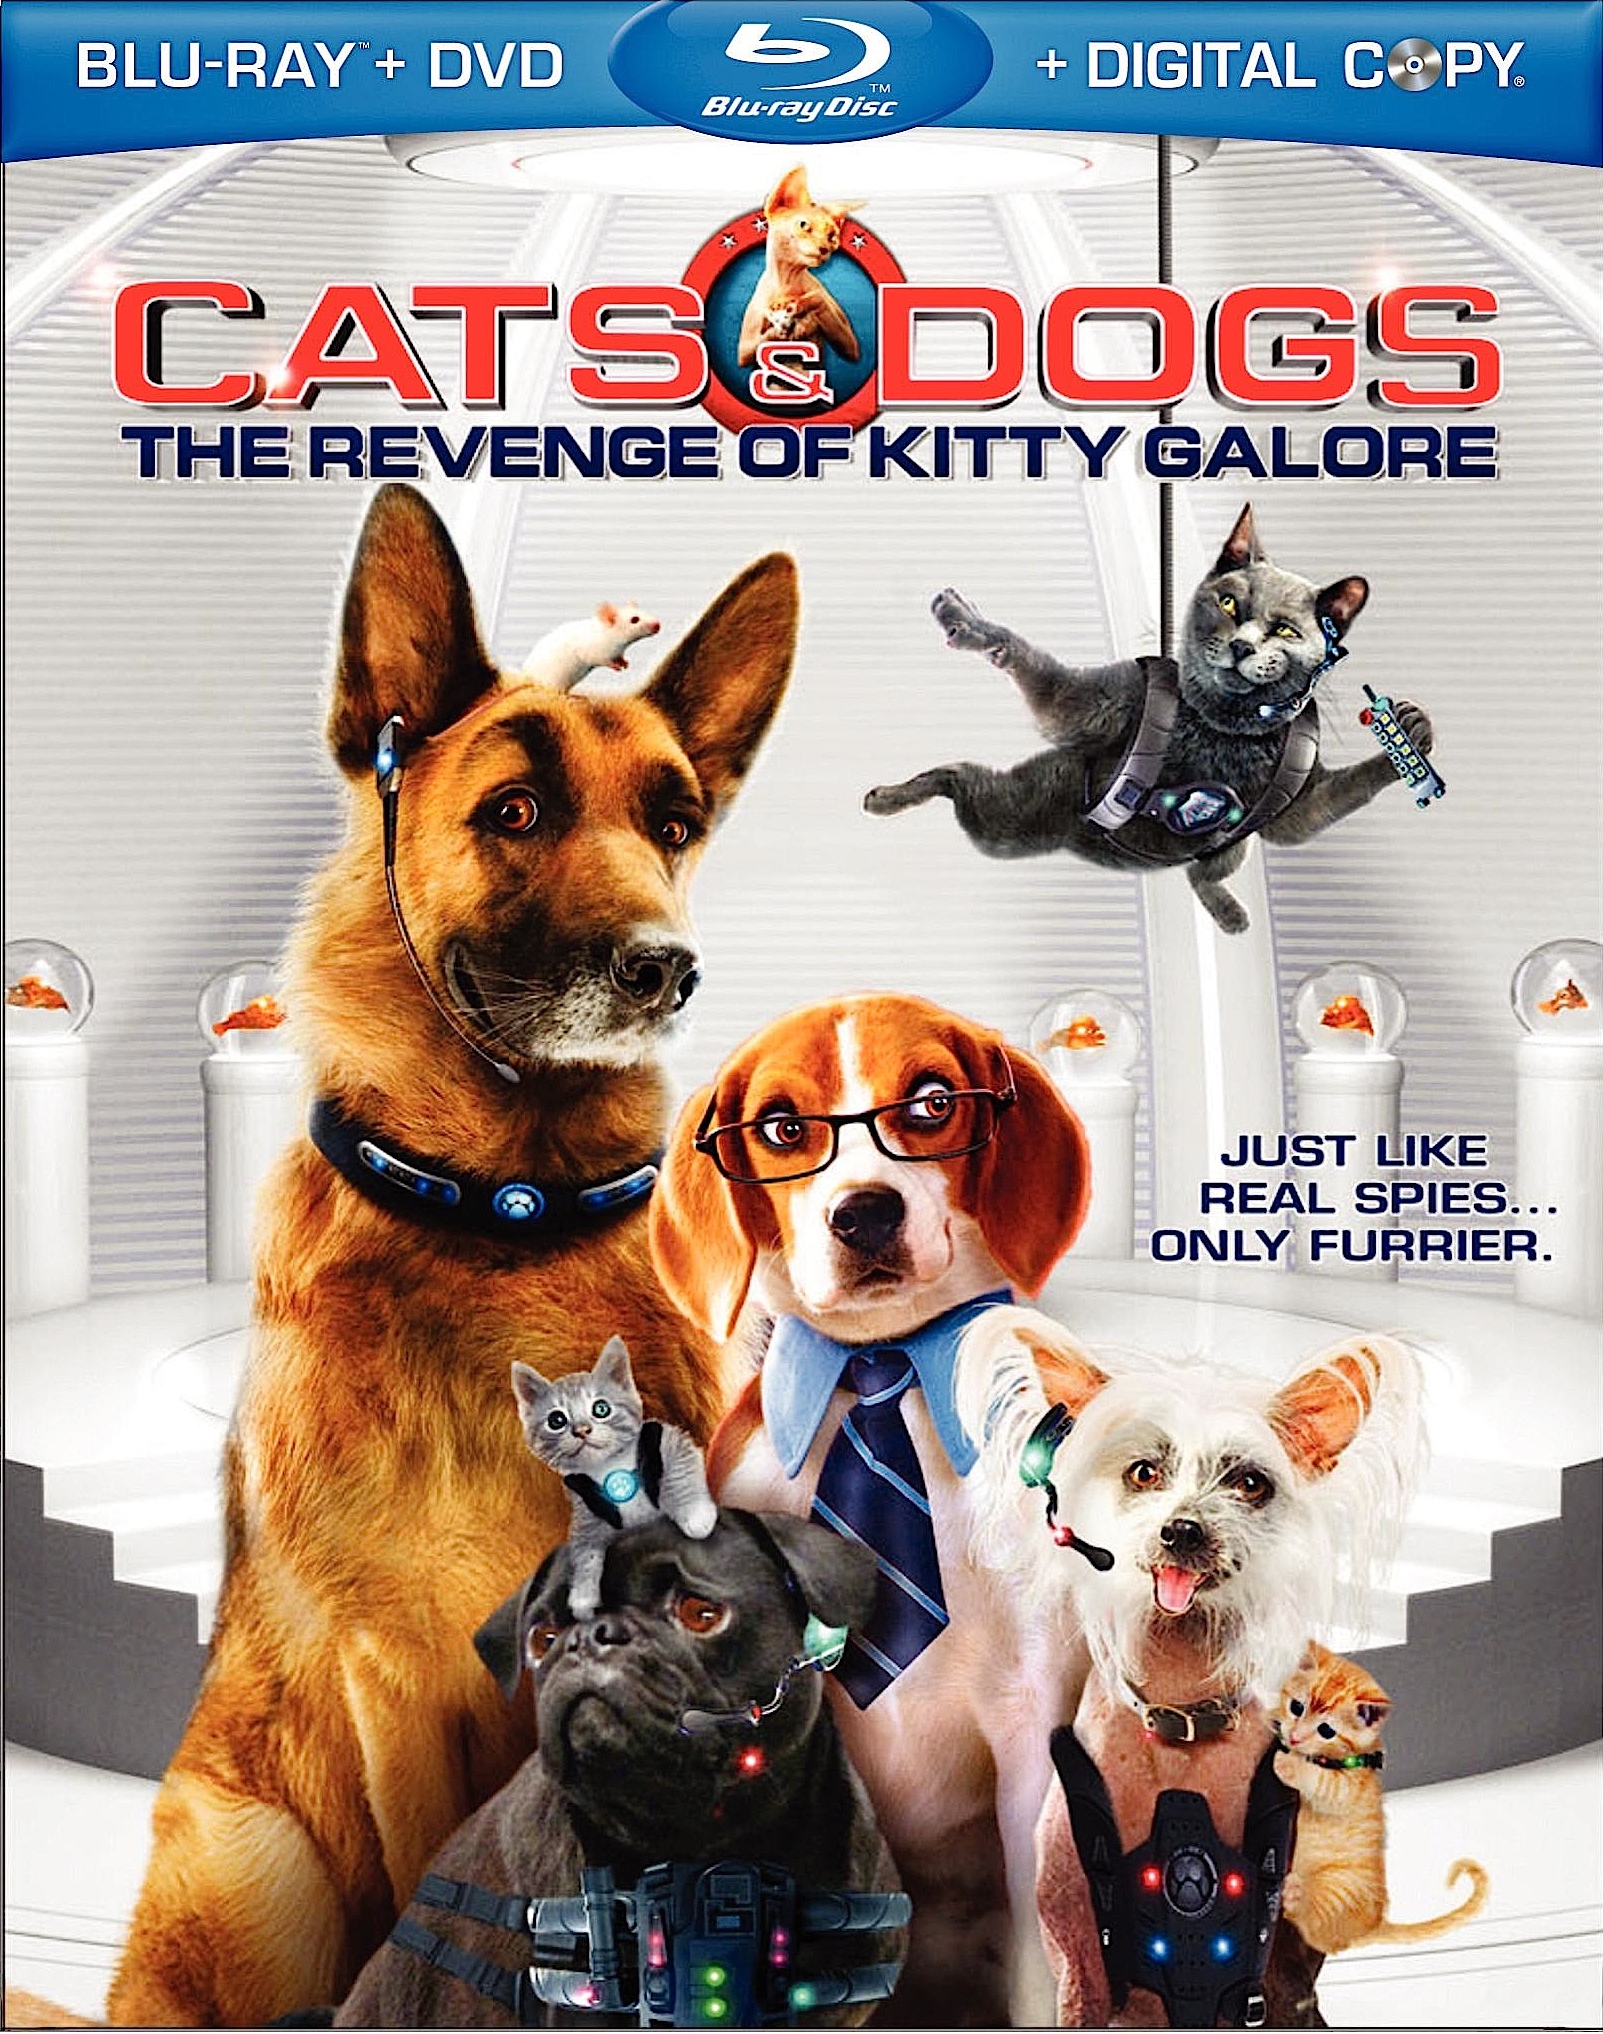 Cats & Dogs: The Revenge Of Kitty Galore #2